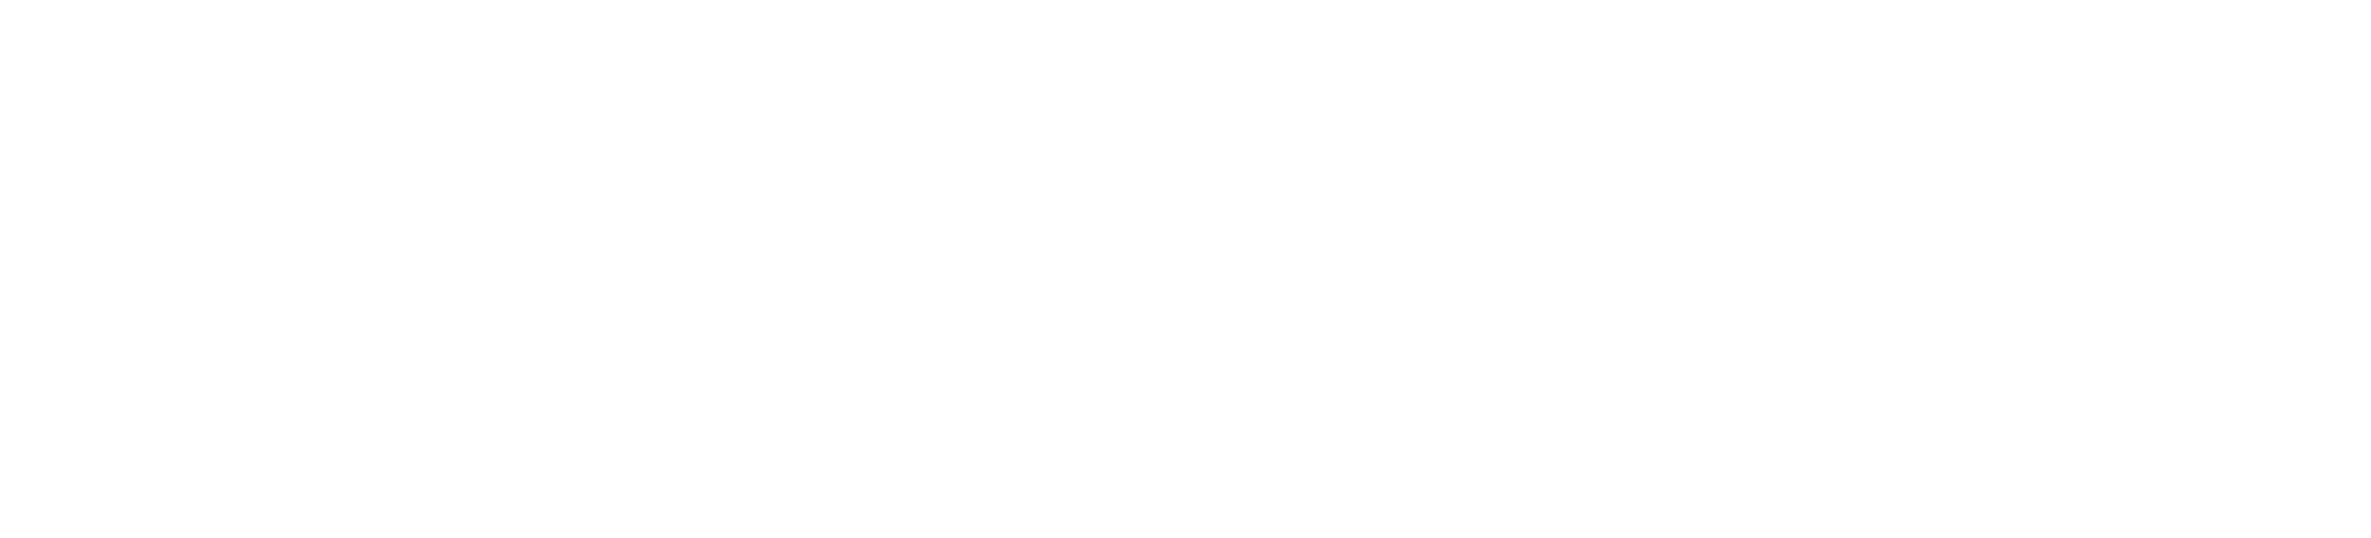 Digital History and Culture Heritage